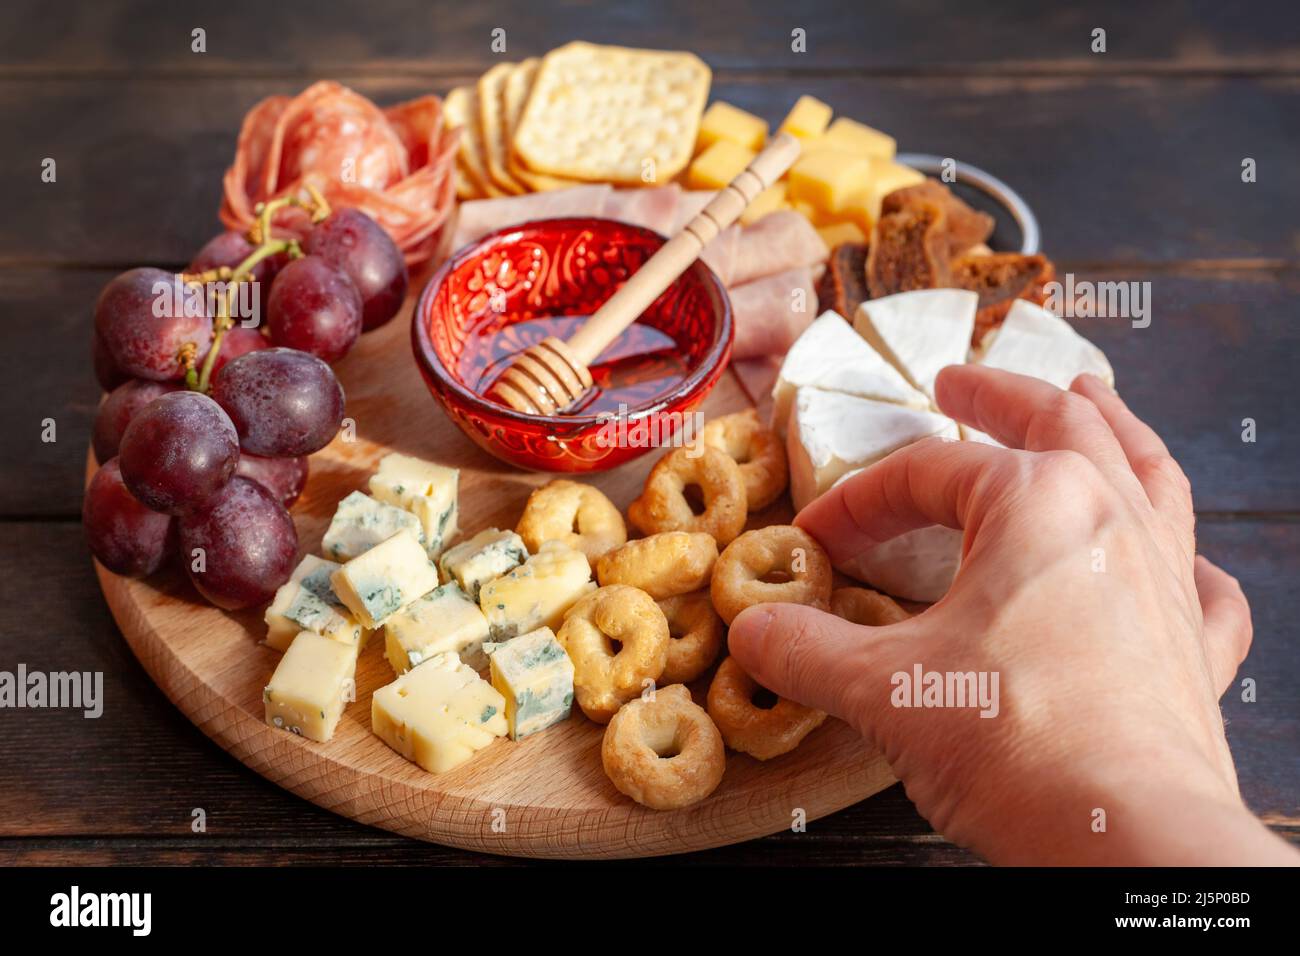 Woman's hand takes a small salty cookie from the appetizers board with assorted cheese, meat, sausage rosette, grape and cookies. Charcuterie and chee Stock Photo